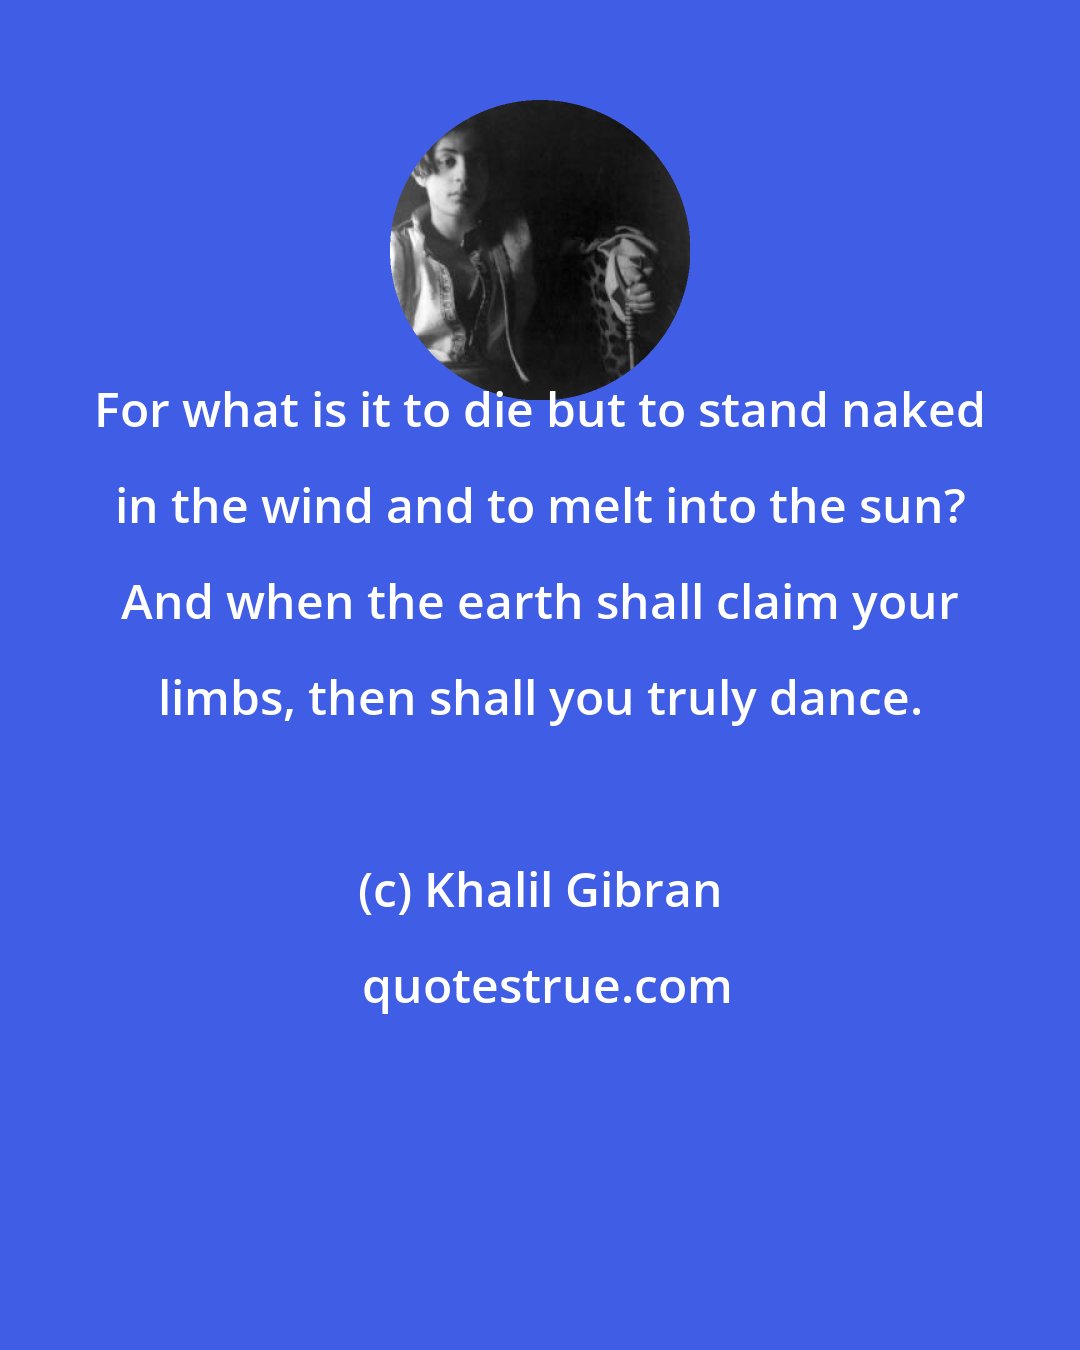 Khalil Gibran: For what is it to die but to stand naked in the wind and to melt into the sun? And when the earth shall claim your limbs, then shall you truly dance.